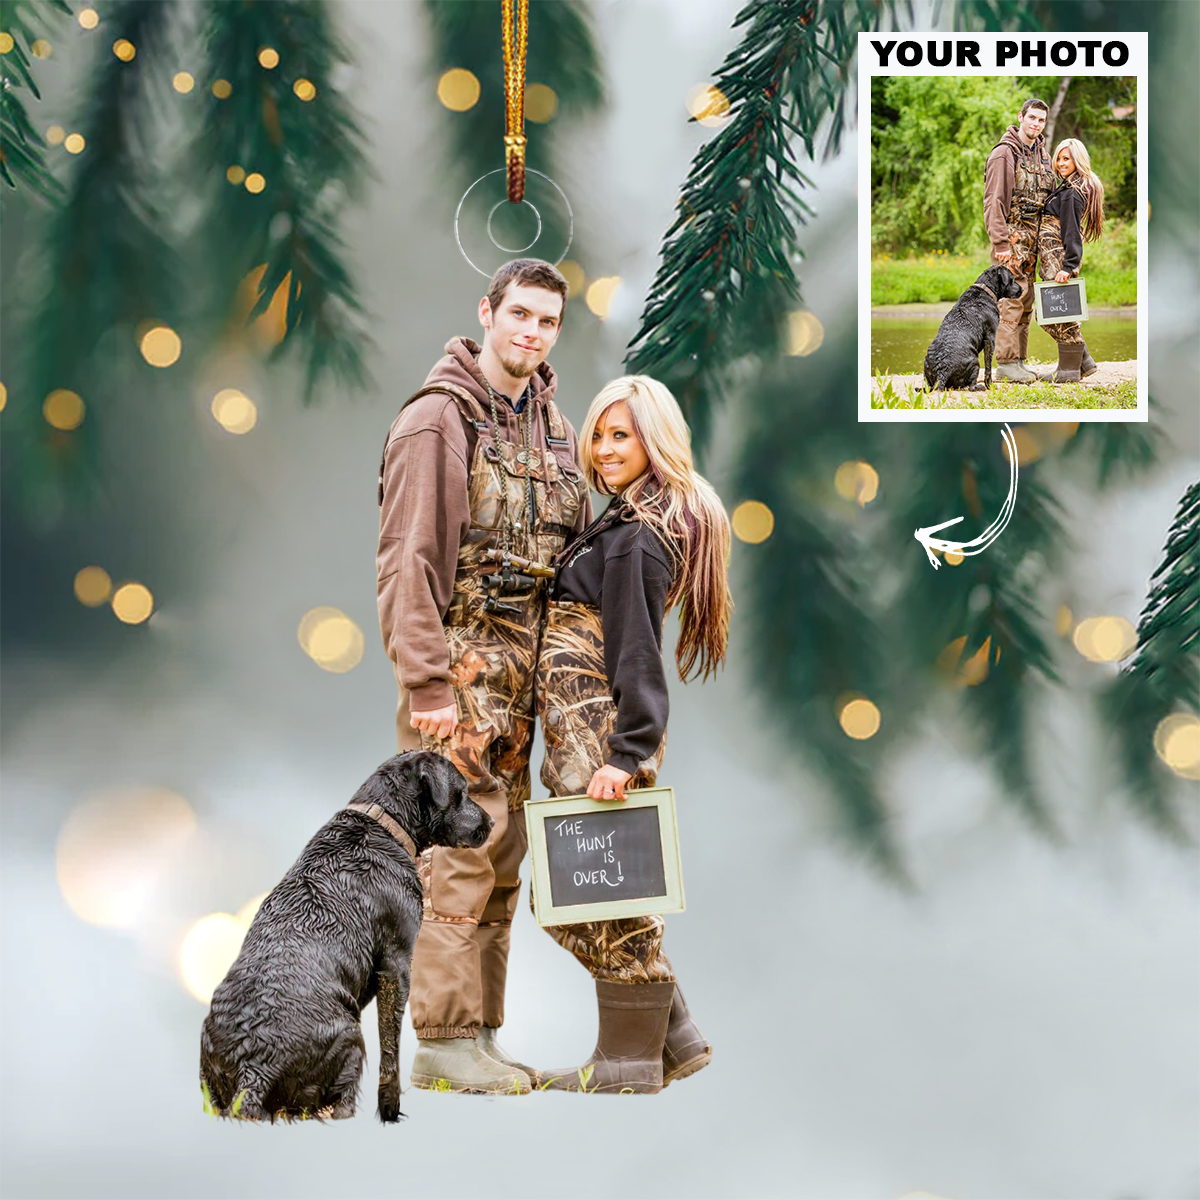 Customized Photo Hunting Couple Ornament - Christmas Ornament Gift For Hunting Couple, Wife, Husband